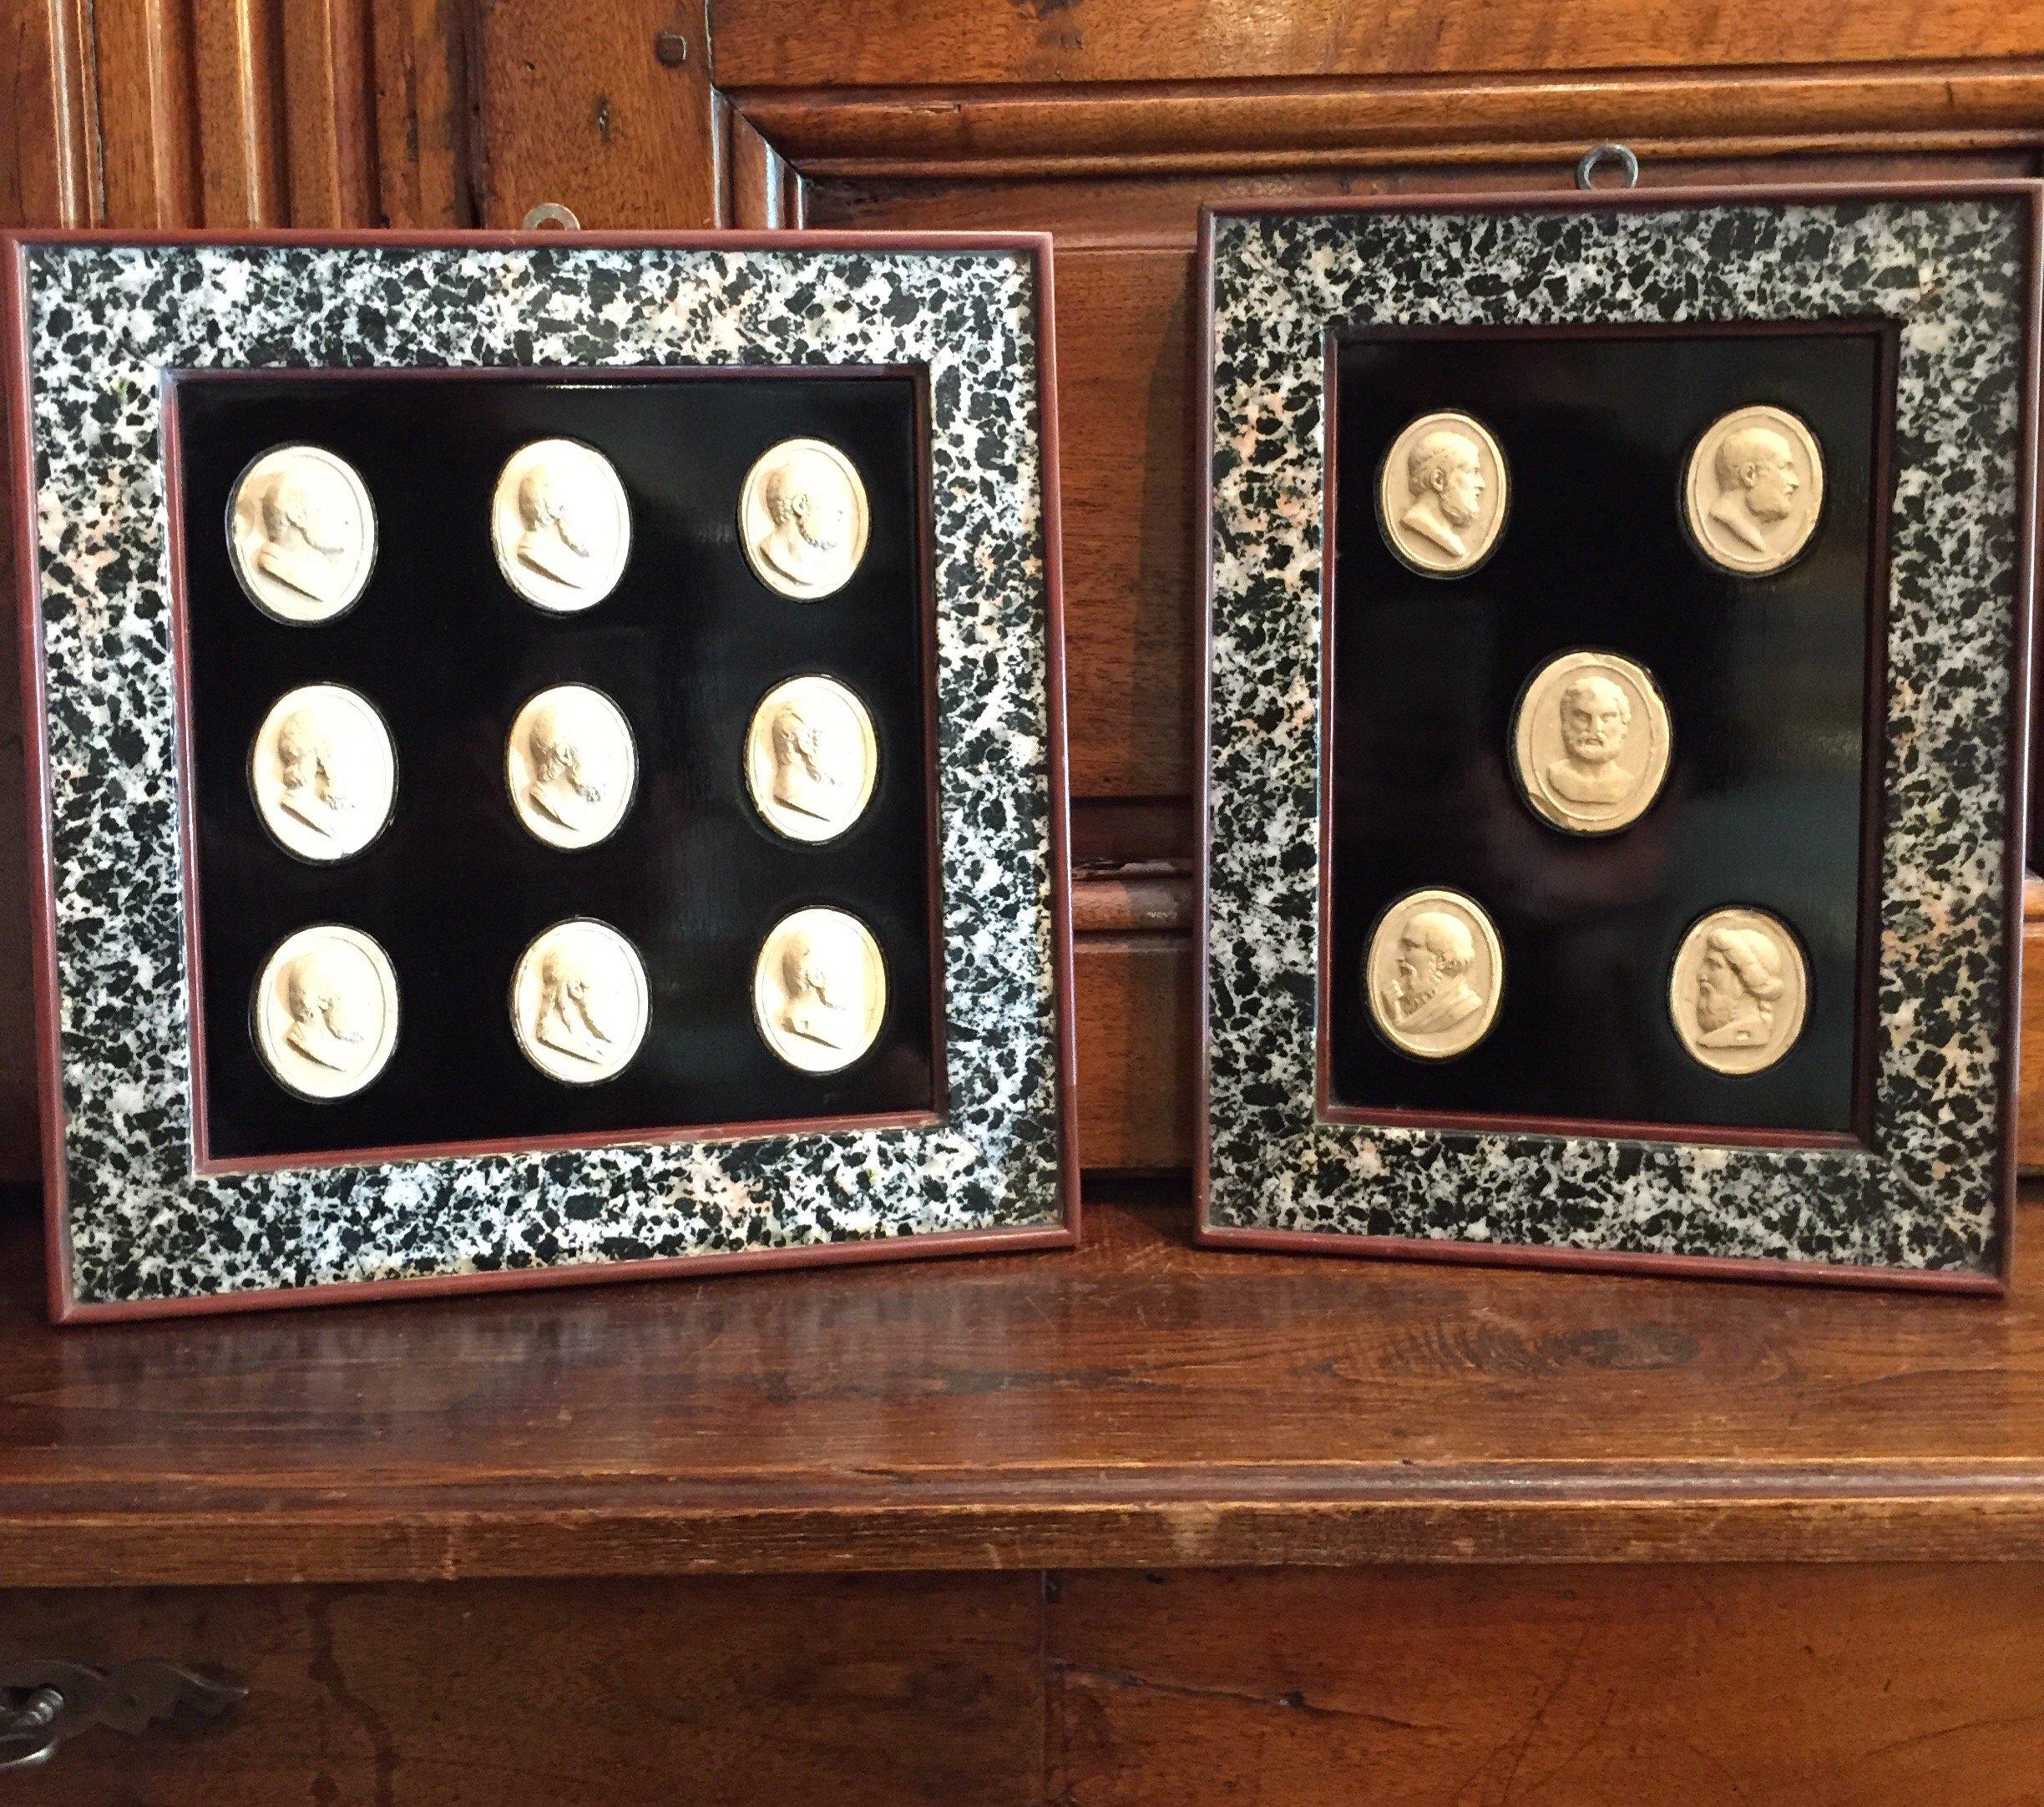 A pair of framed Grand Tour plaster intaglios dating from the early 19th century. This set of two Grand Tour neoclassical cameos compositions, consists of nine and five oval plaster cast medallions, depicting Greek philosopher profiles, mounted on